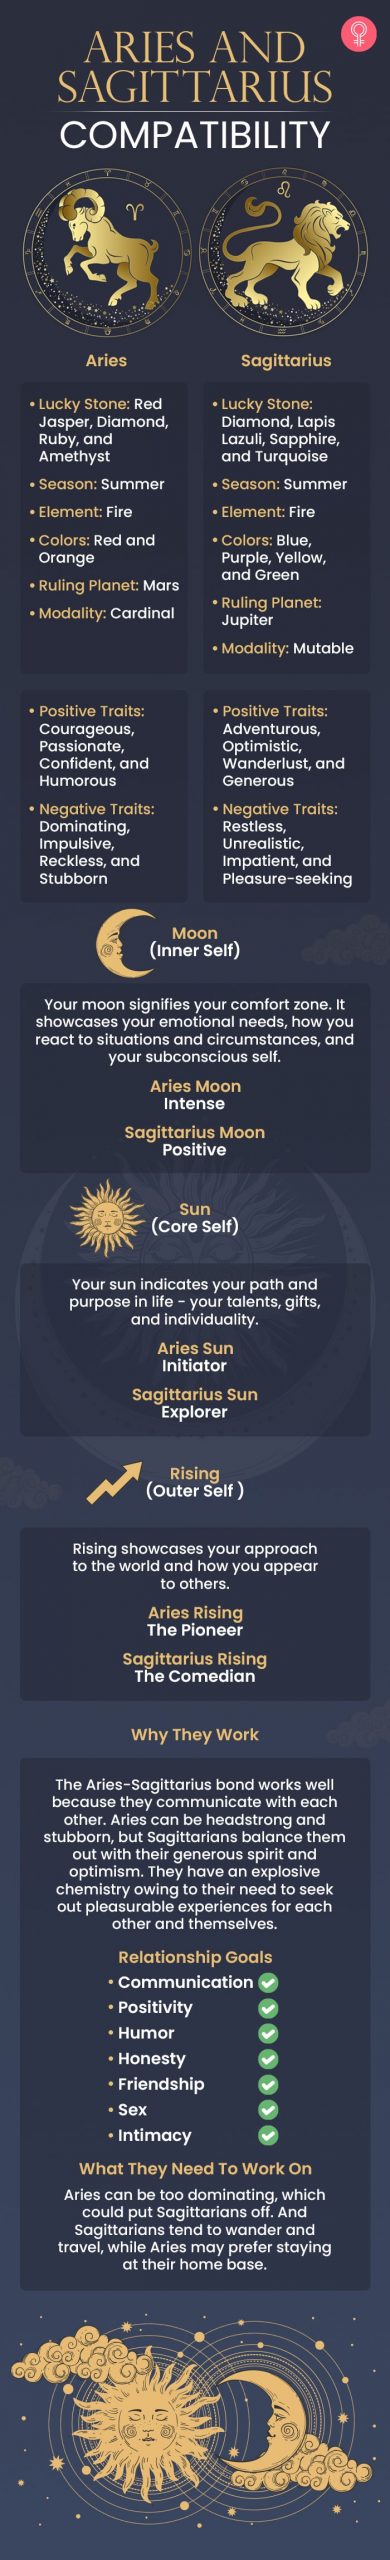 aries and sagittarius compatibility (infographic)